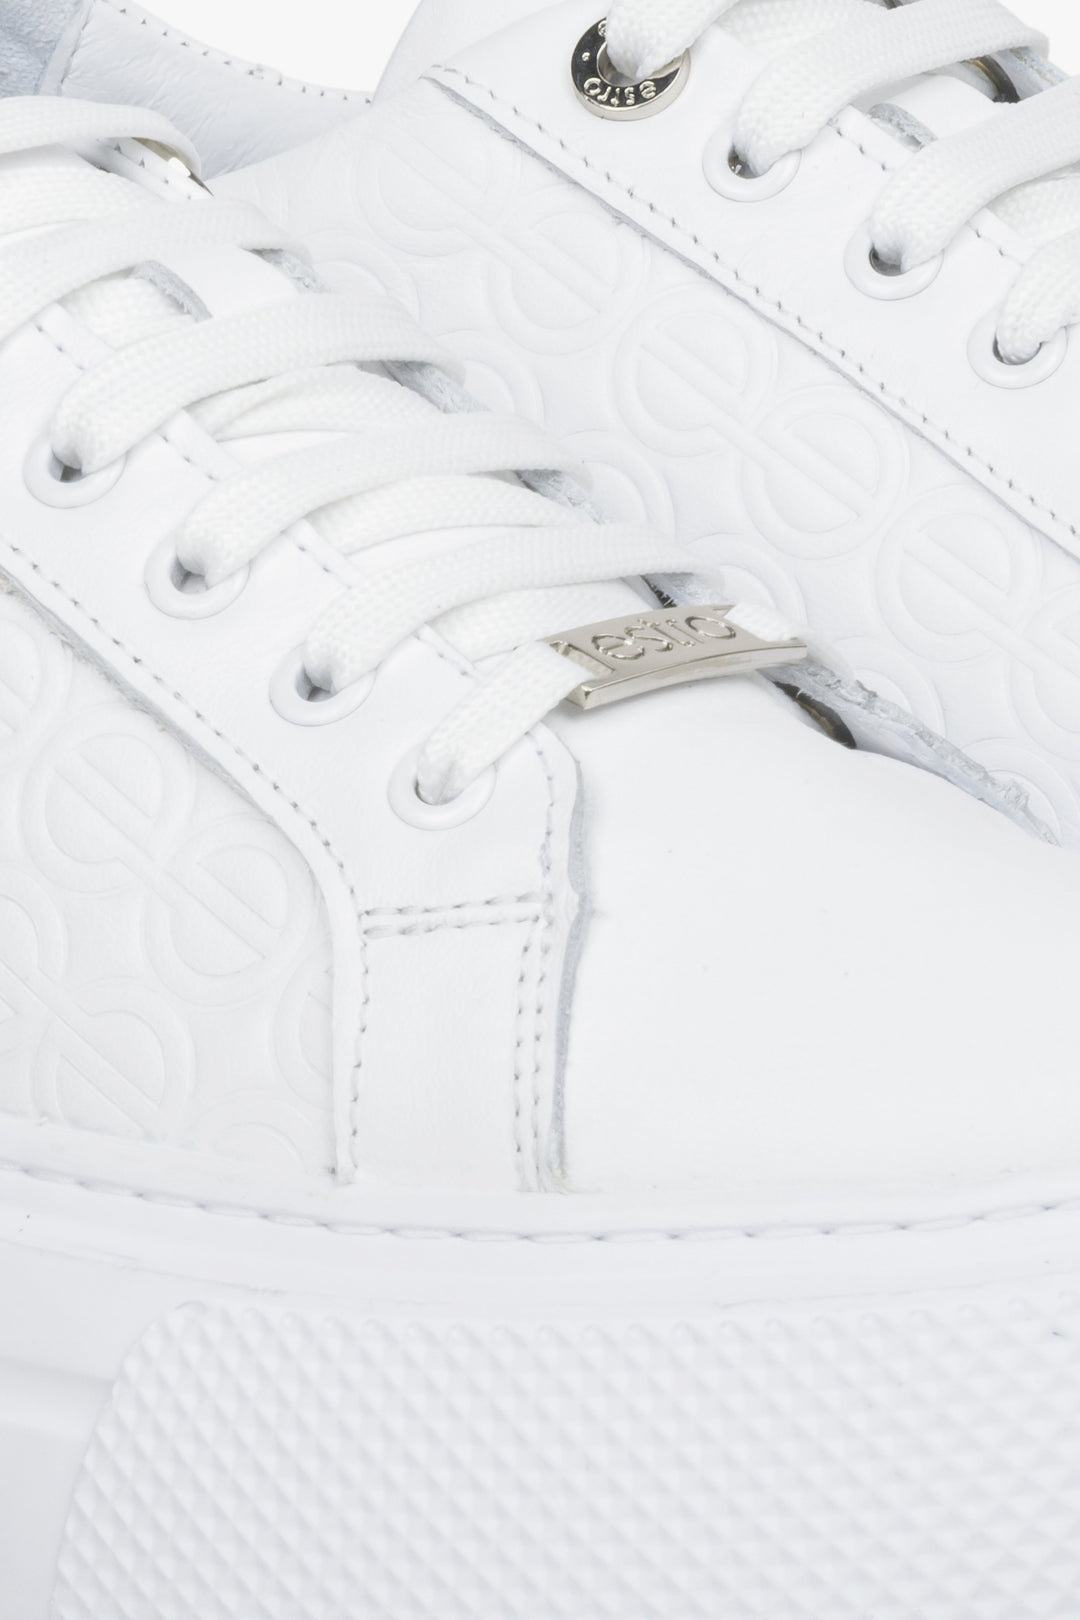 Women's white leather sneakers by Estro - close-up on the details.